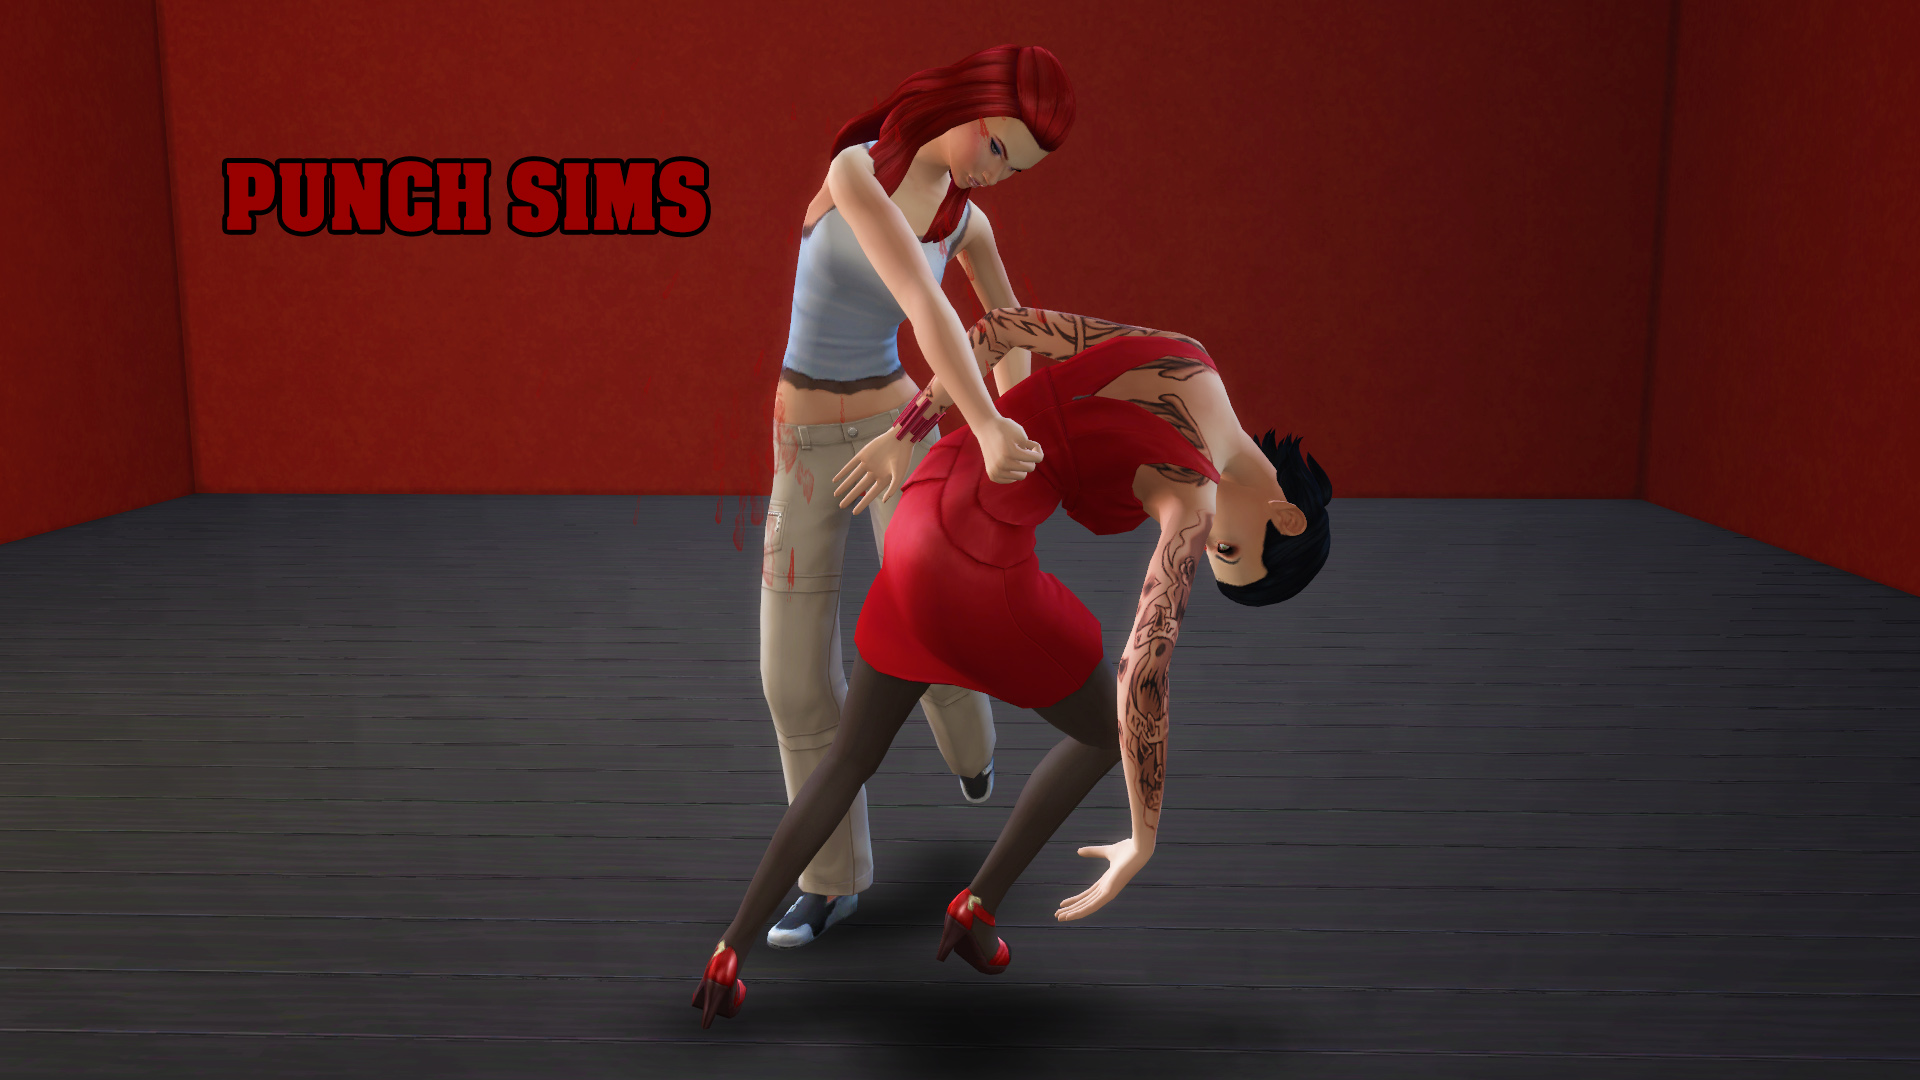 View the Mod DB Extreme Violence mod for The Sims 4 image Punch Sims. extre...